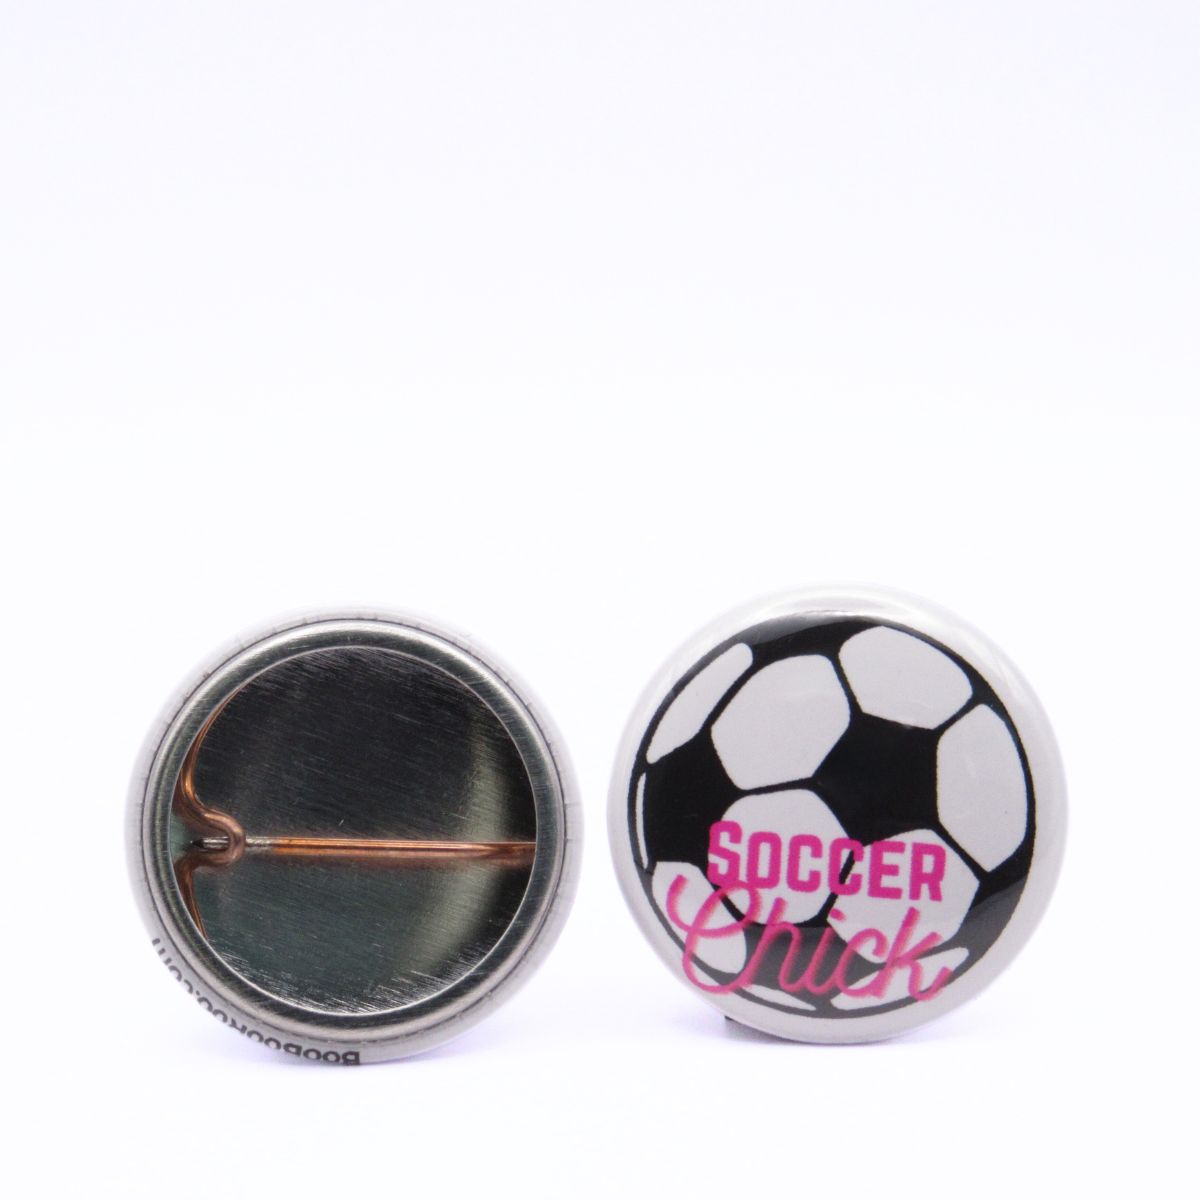 BooBooRoo Pinback Button (i.e. button, badge, pin) displaying a soccer ball and the words, "Soccer Chick." Image showing front and back of high-quality metal button.